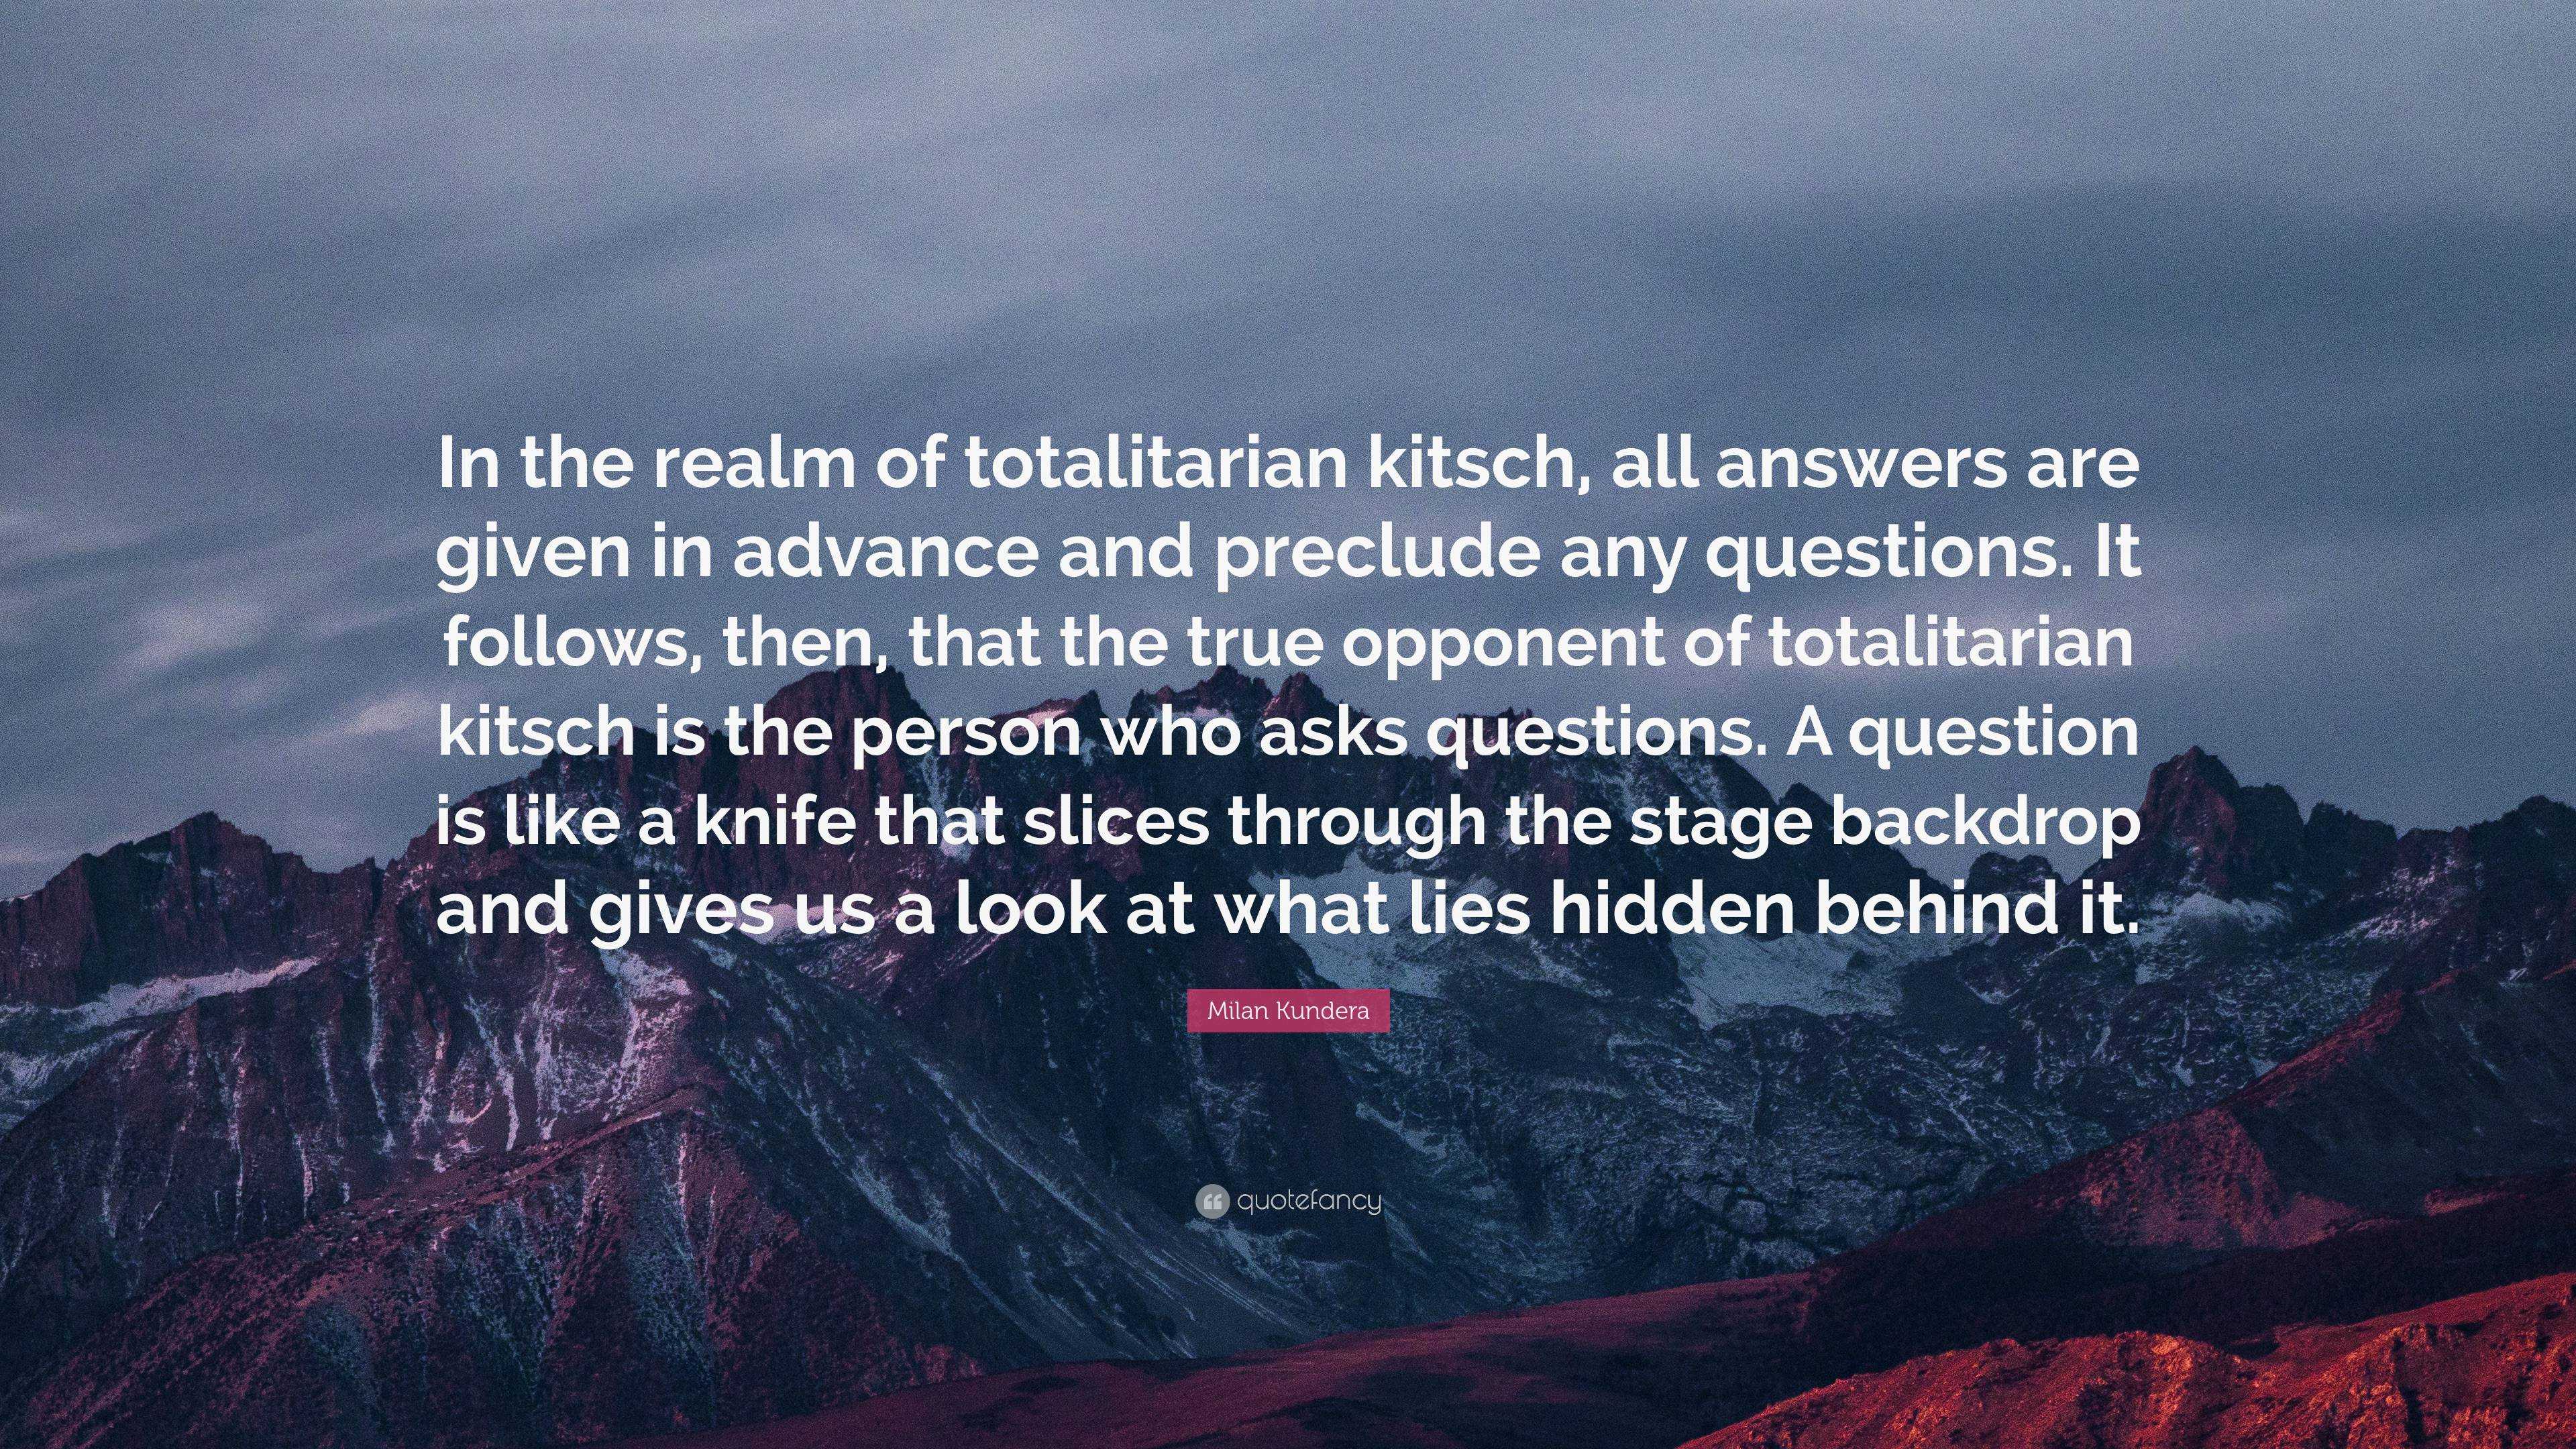 Milan Kundera Quote: “In the realm of totalitarian kitsch, all answers are  given in advance and preclude any questions. It follows, then, that”